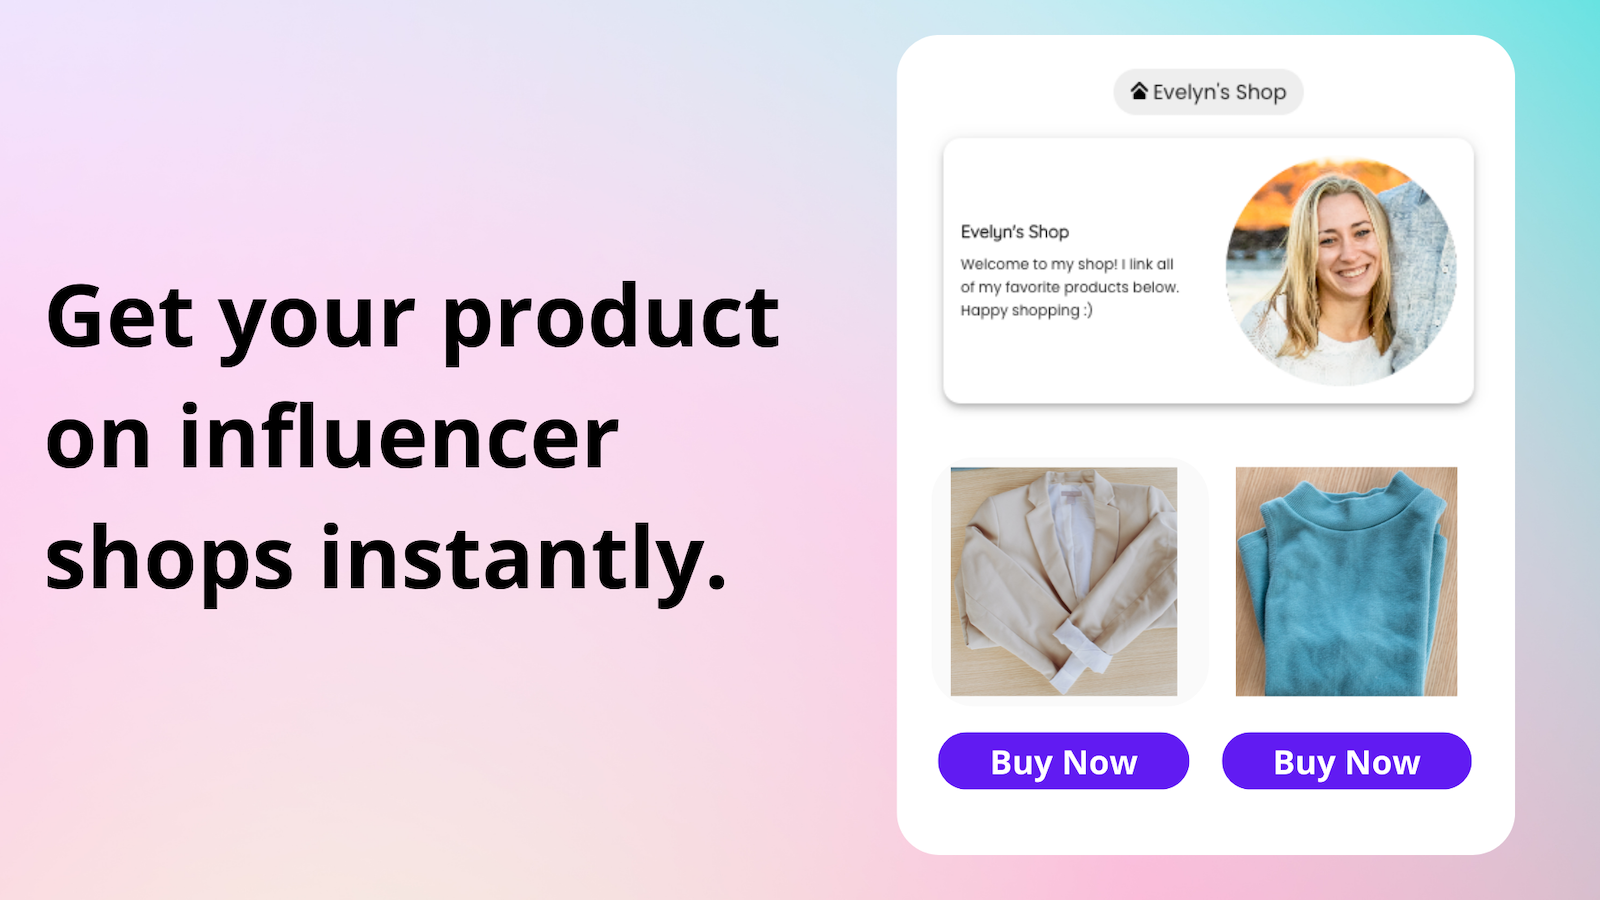 Get your product on influencer shops instantly.